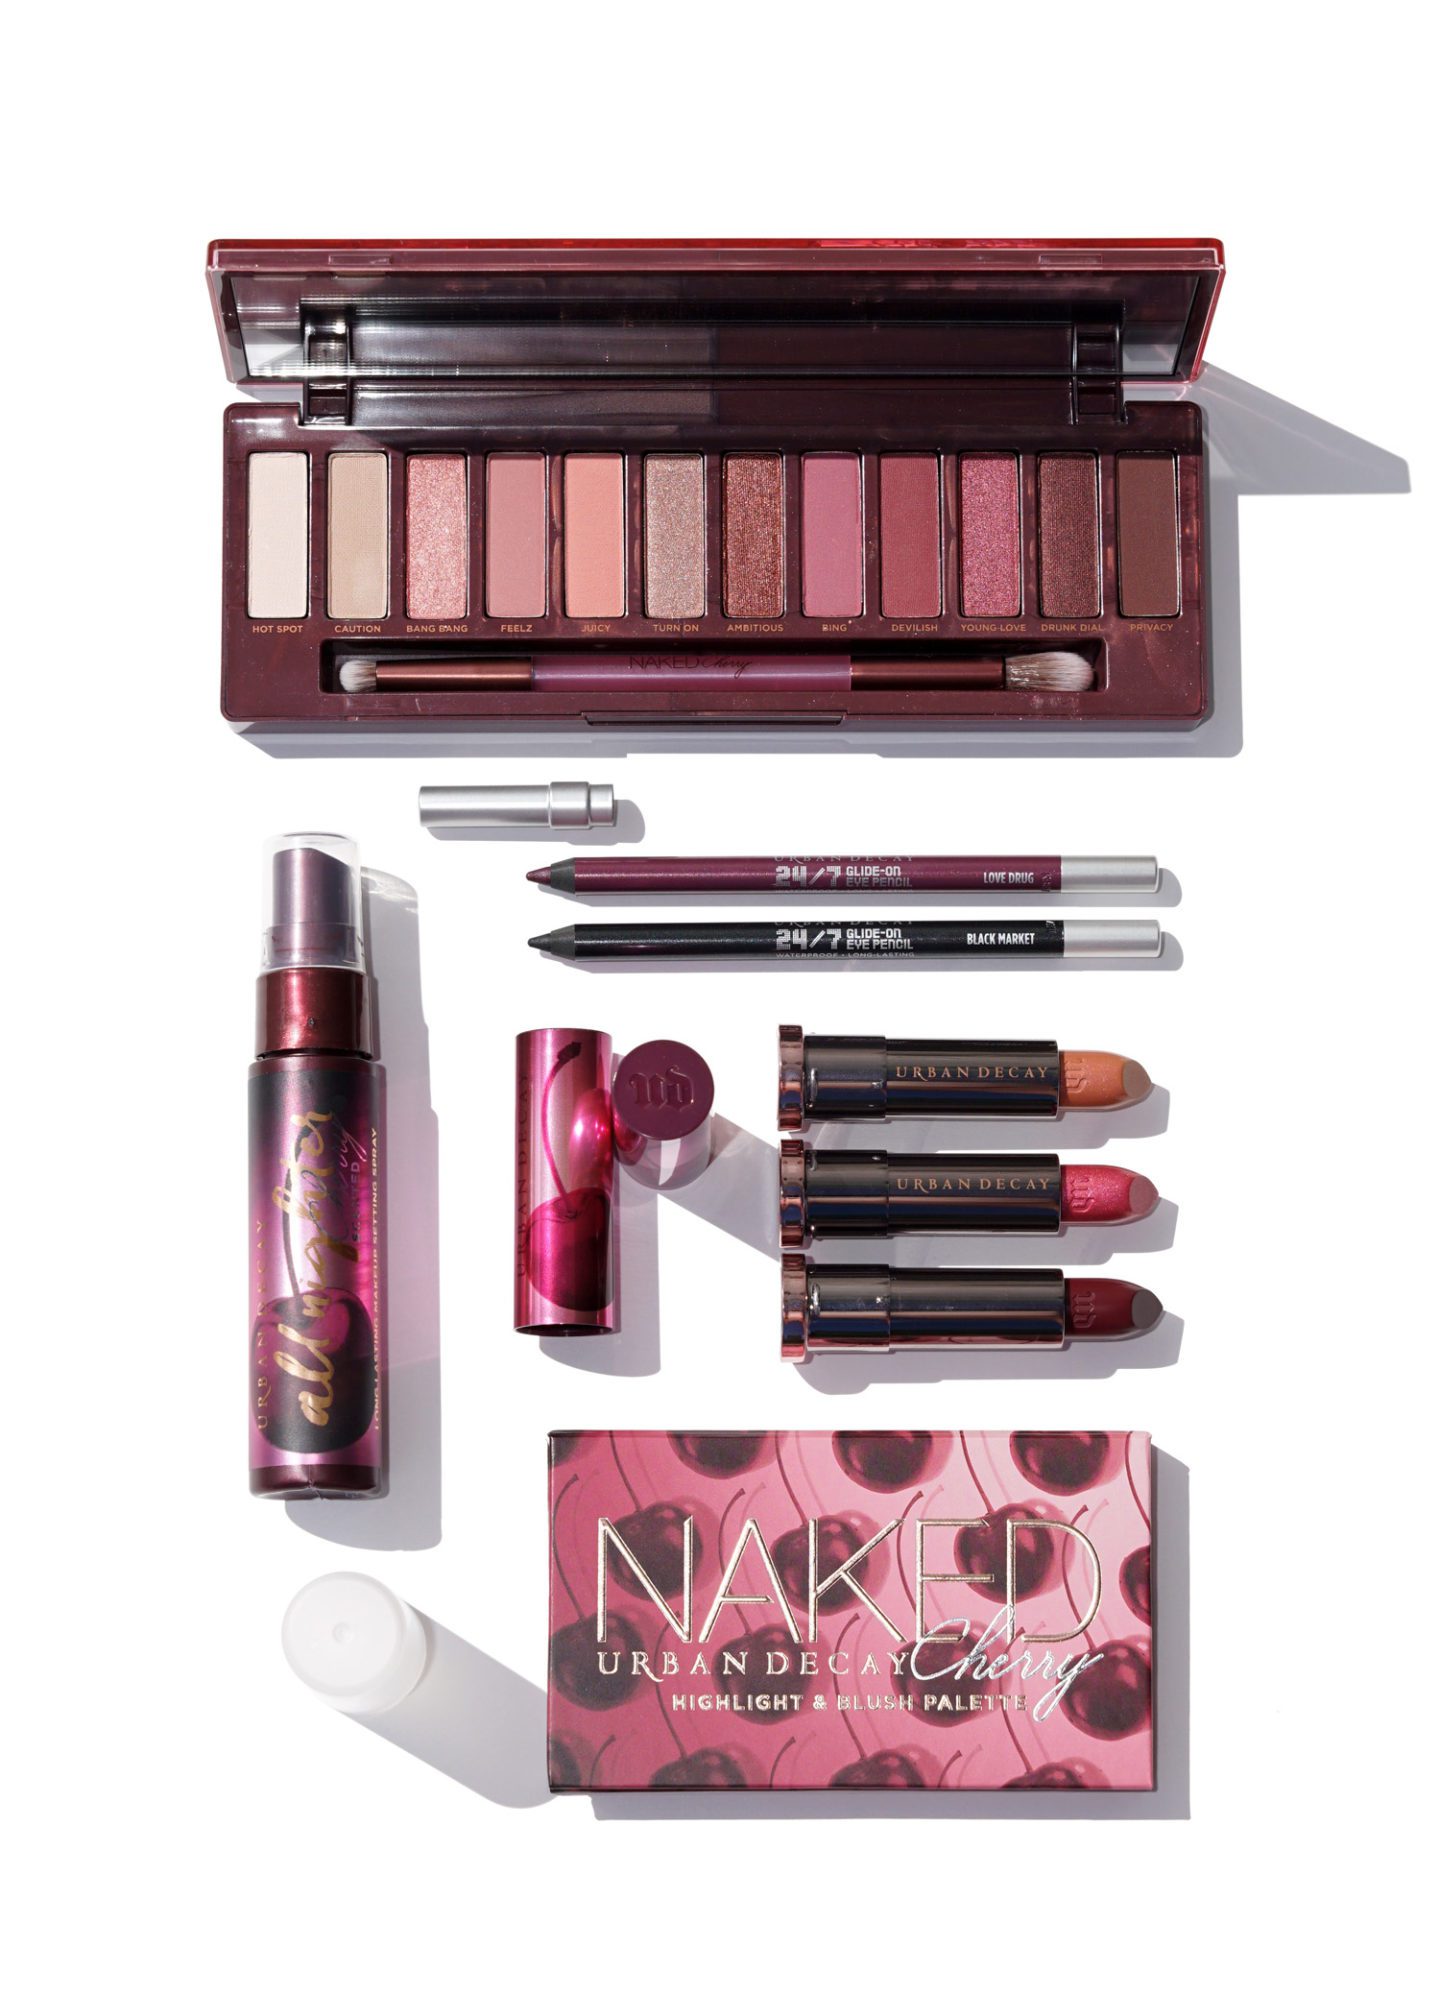 Urban Decay Naked Cherry Collection Review + Swatches